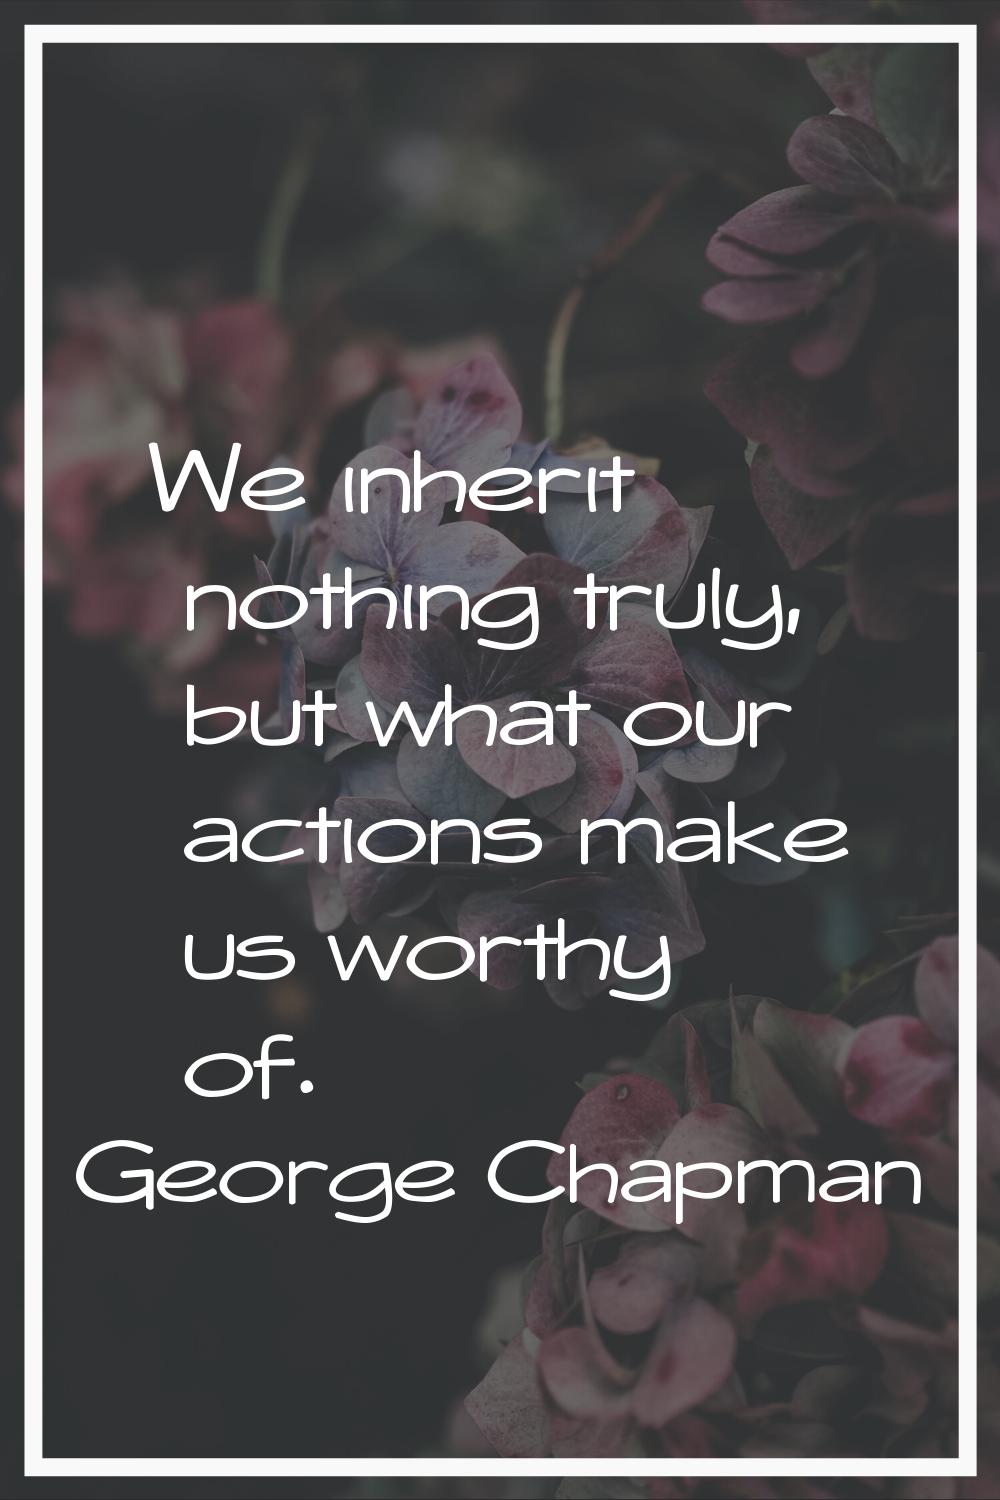 We inherit nothing truly, but what our actions make us worthy of.